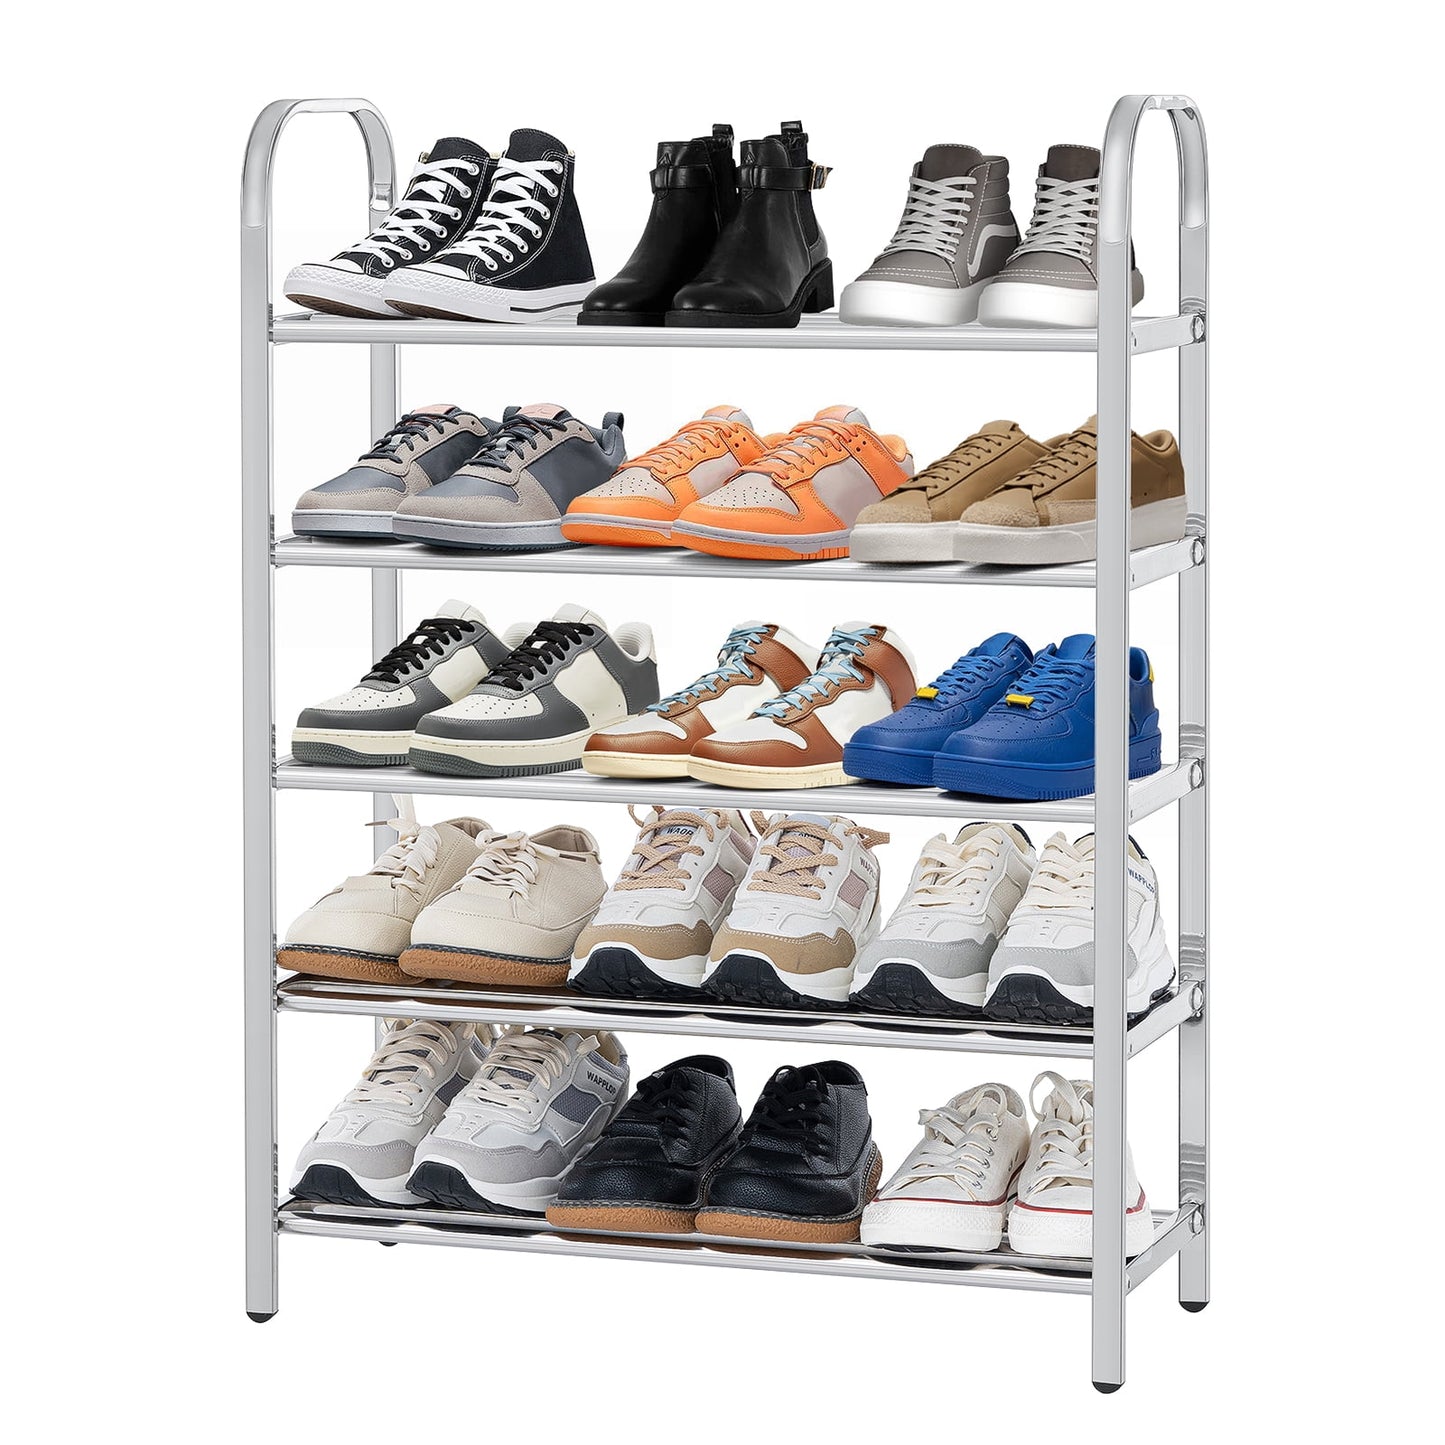 HONEIER 5/6 Tier Shoe Rack, Sturdy Metal Shoe Storage Shelf for 18 Pairs of Shoes, Entryway, Hallway and Closet Space Saving Storage and Organization